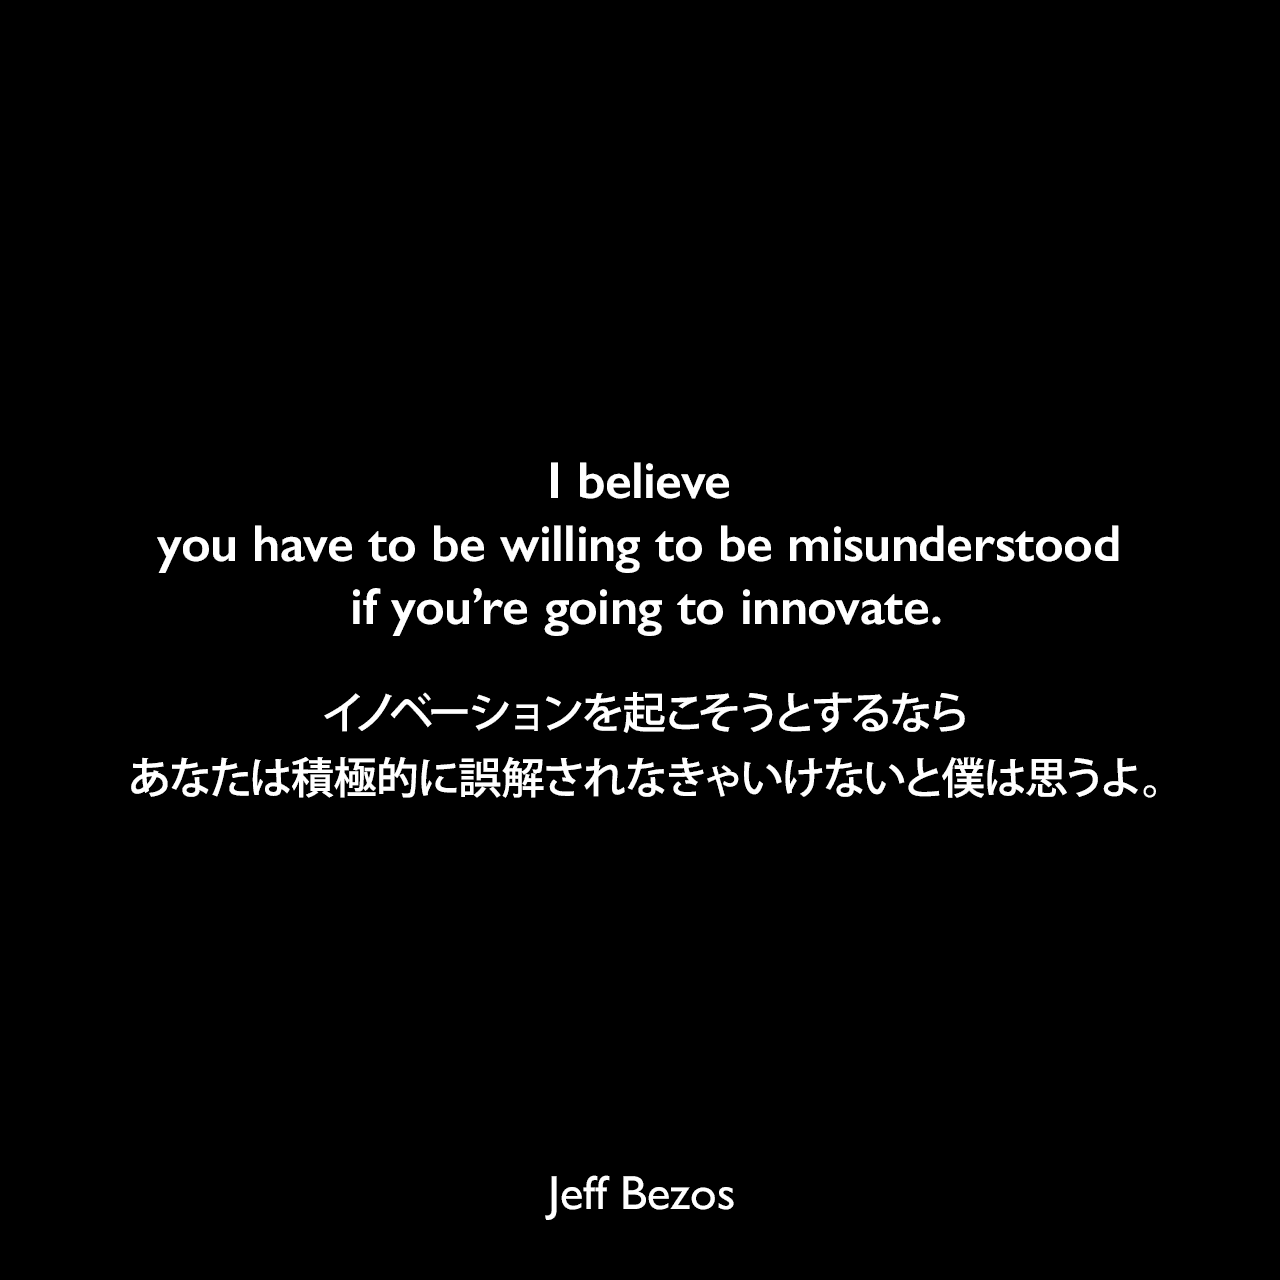 I believe you have to be willing to be misunderstood if you’re going to innovate.イノベーションを起こそうとするなら、あなたは積極的に誤解されなきゃいけないと僕は思うよ。Jeff Bezos